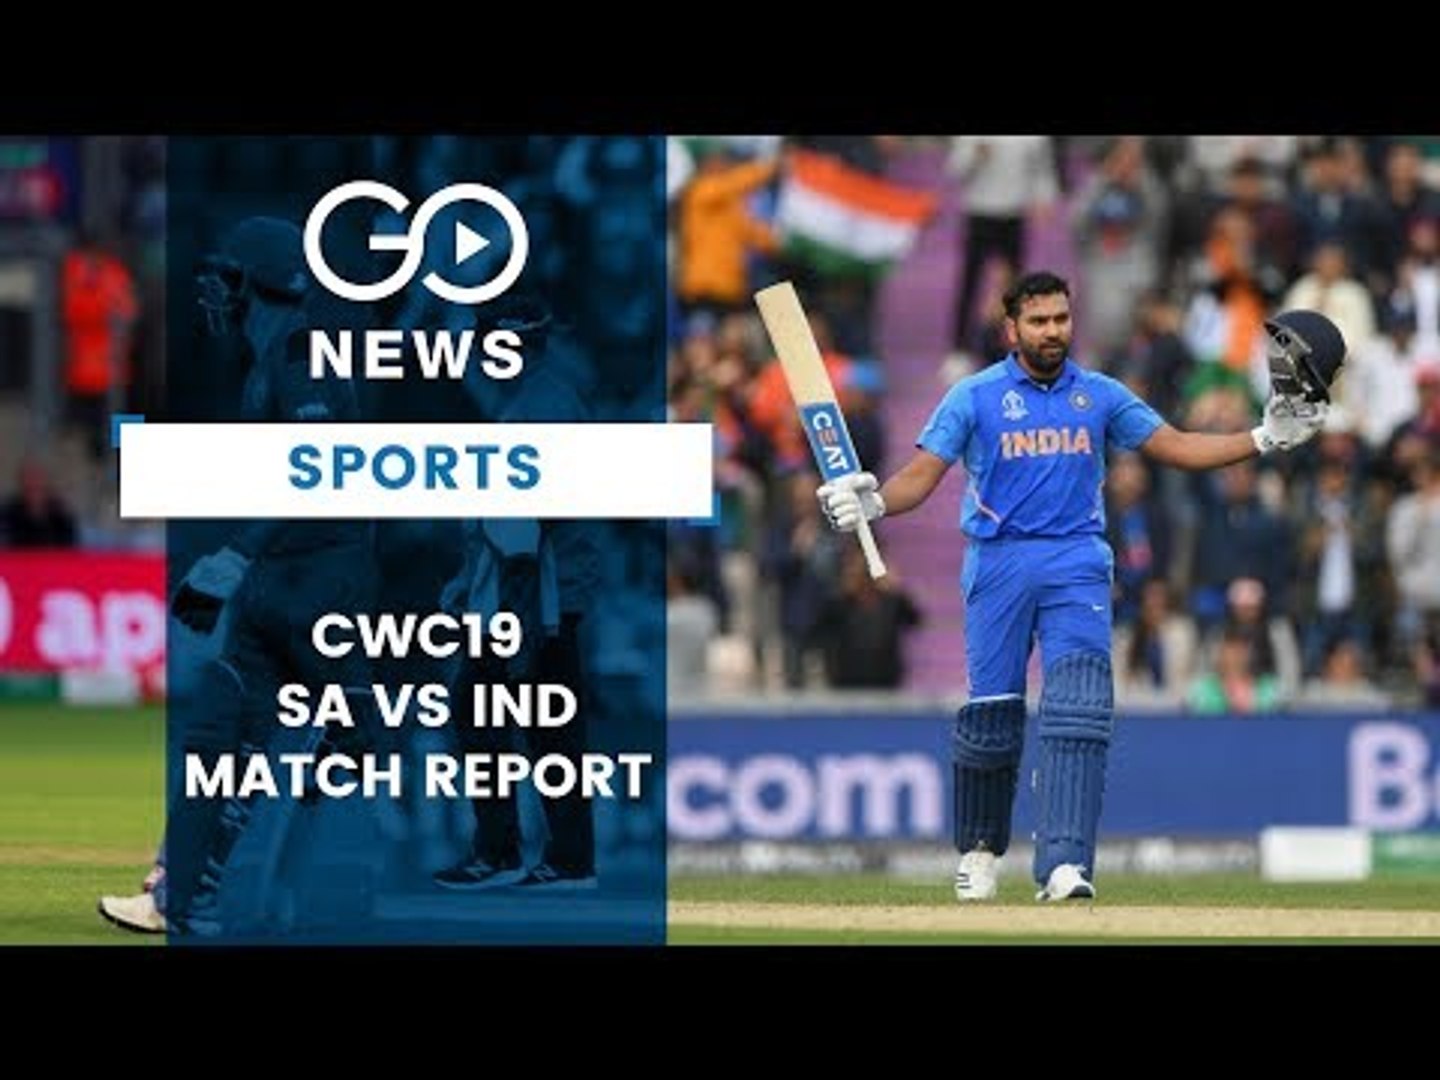 ⁣CWC19: South Africa vs India (Match Report)